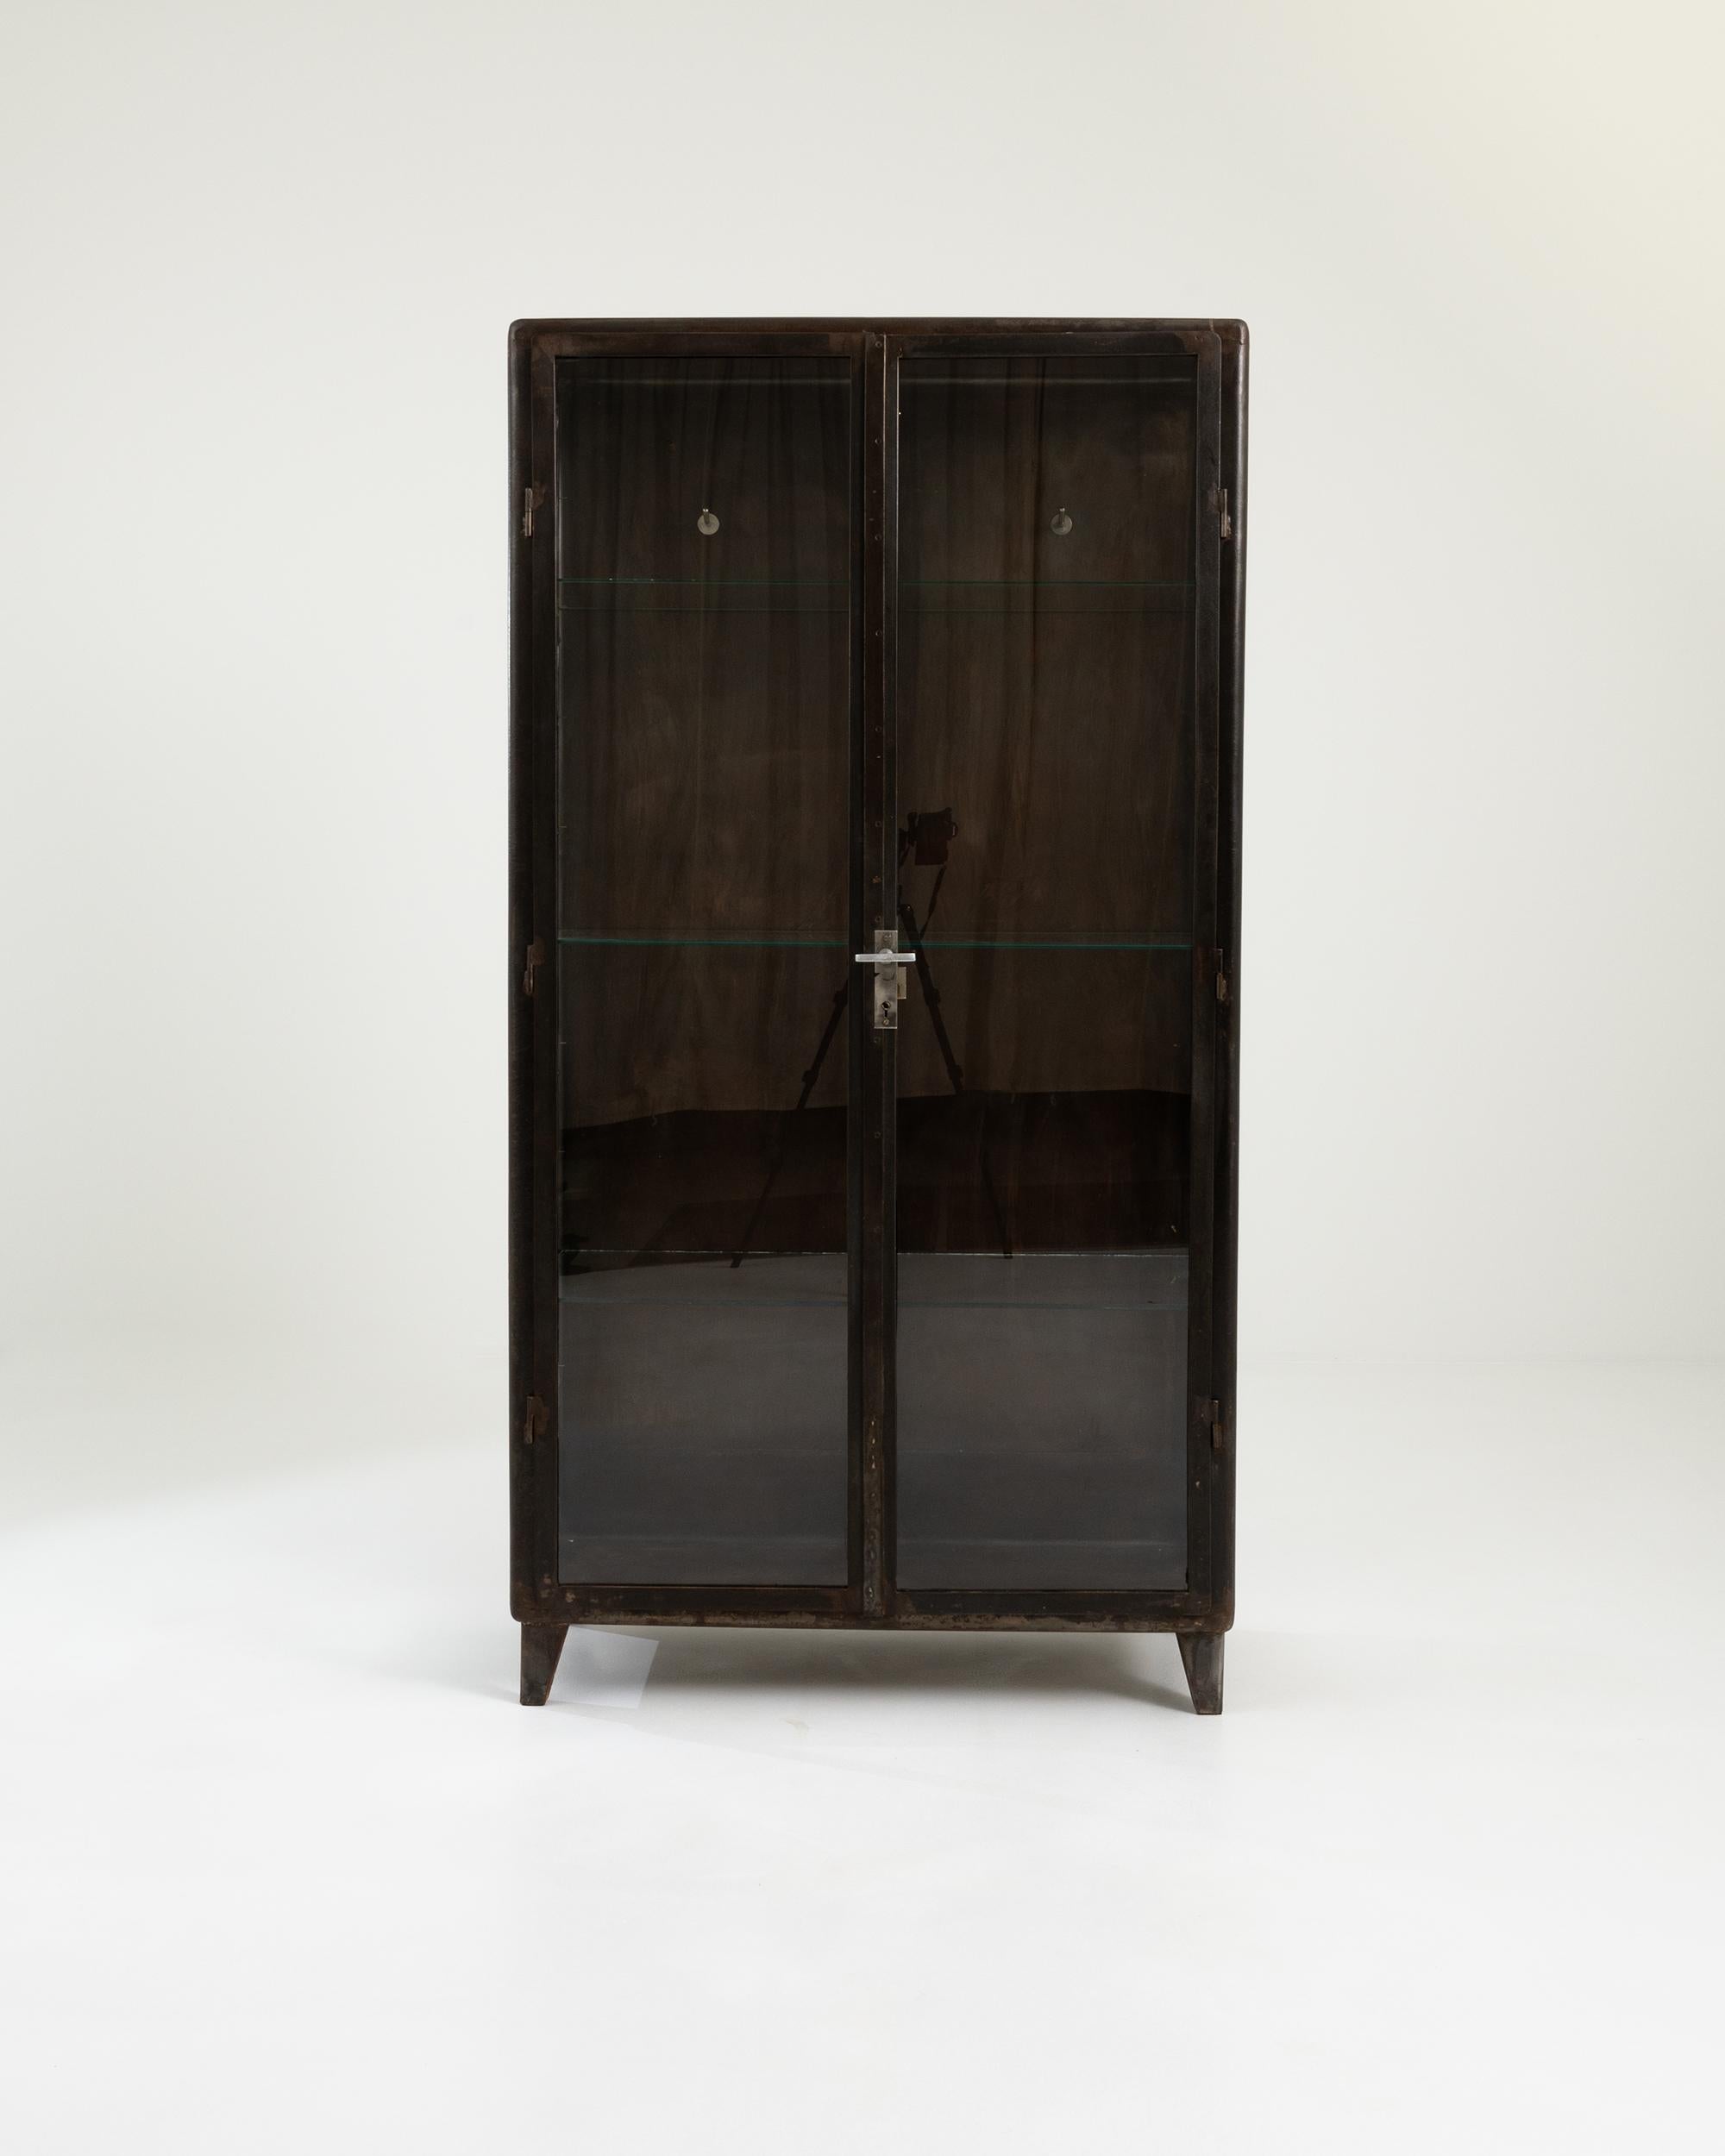 Designed to showcase medical equipment, this 1950s Central European vitrine is primarily constructed with glass panels, including front doors, sides, and shelves, to ensure maximum visibility. The polished metal frame, with its rich dark brown hue,